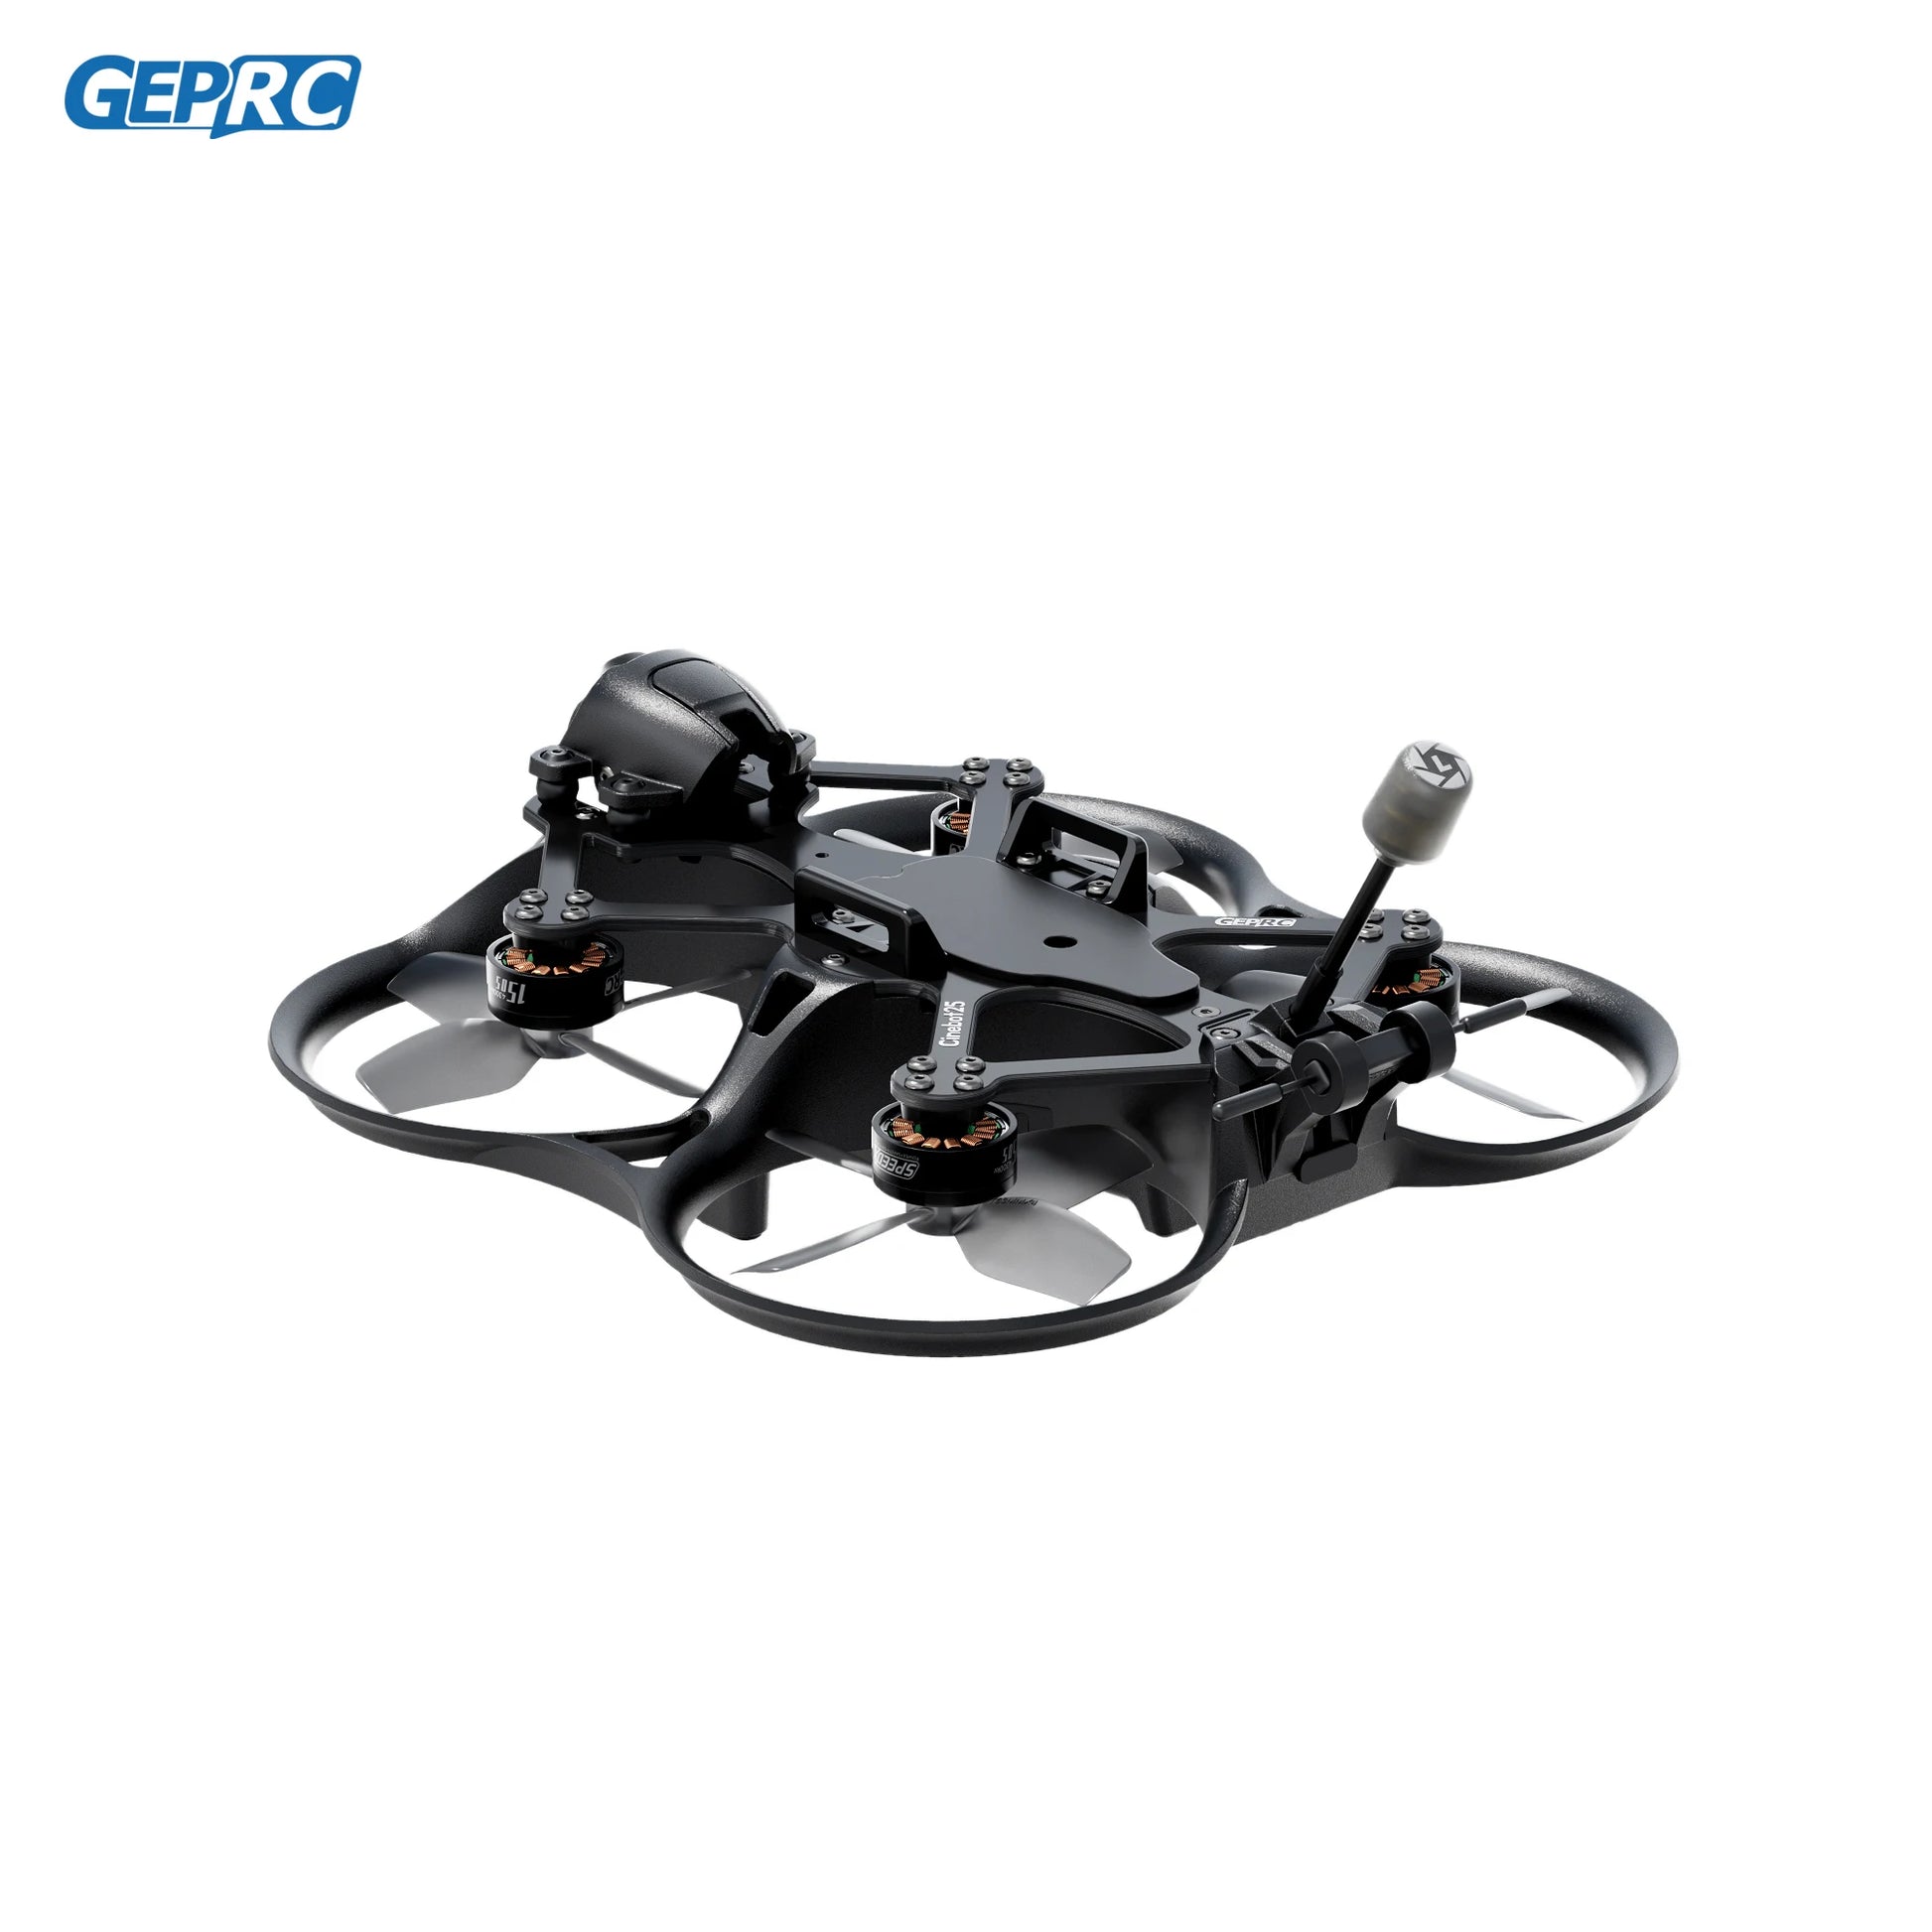 GEPRC Cinebot25 S HD Wasp FPV Drone 